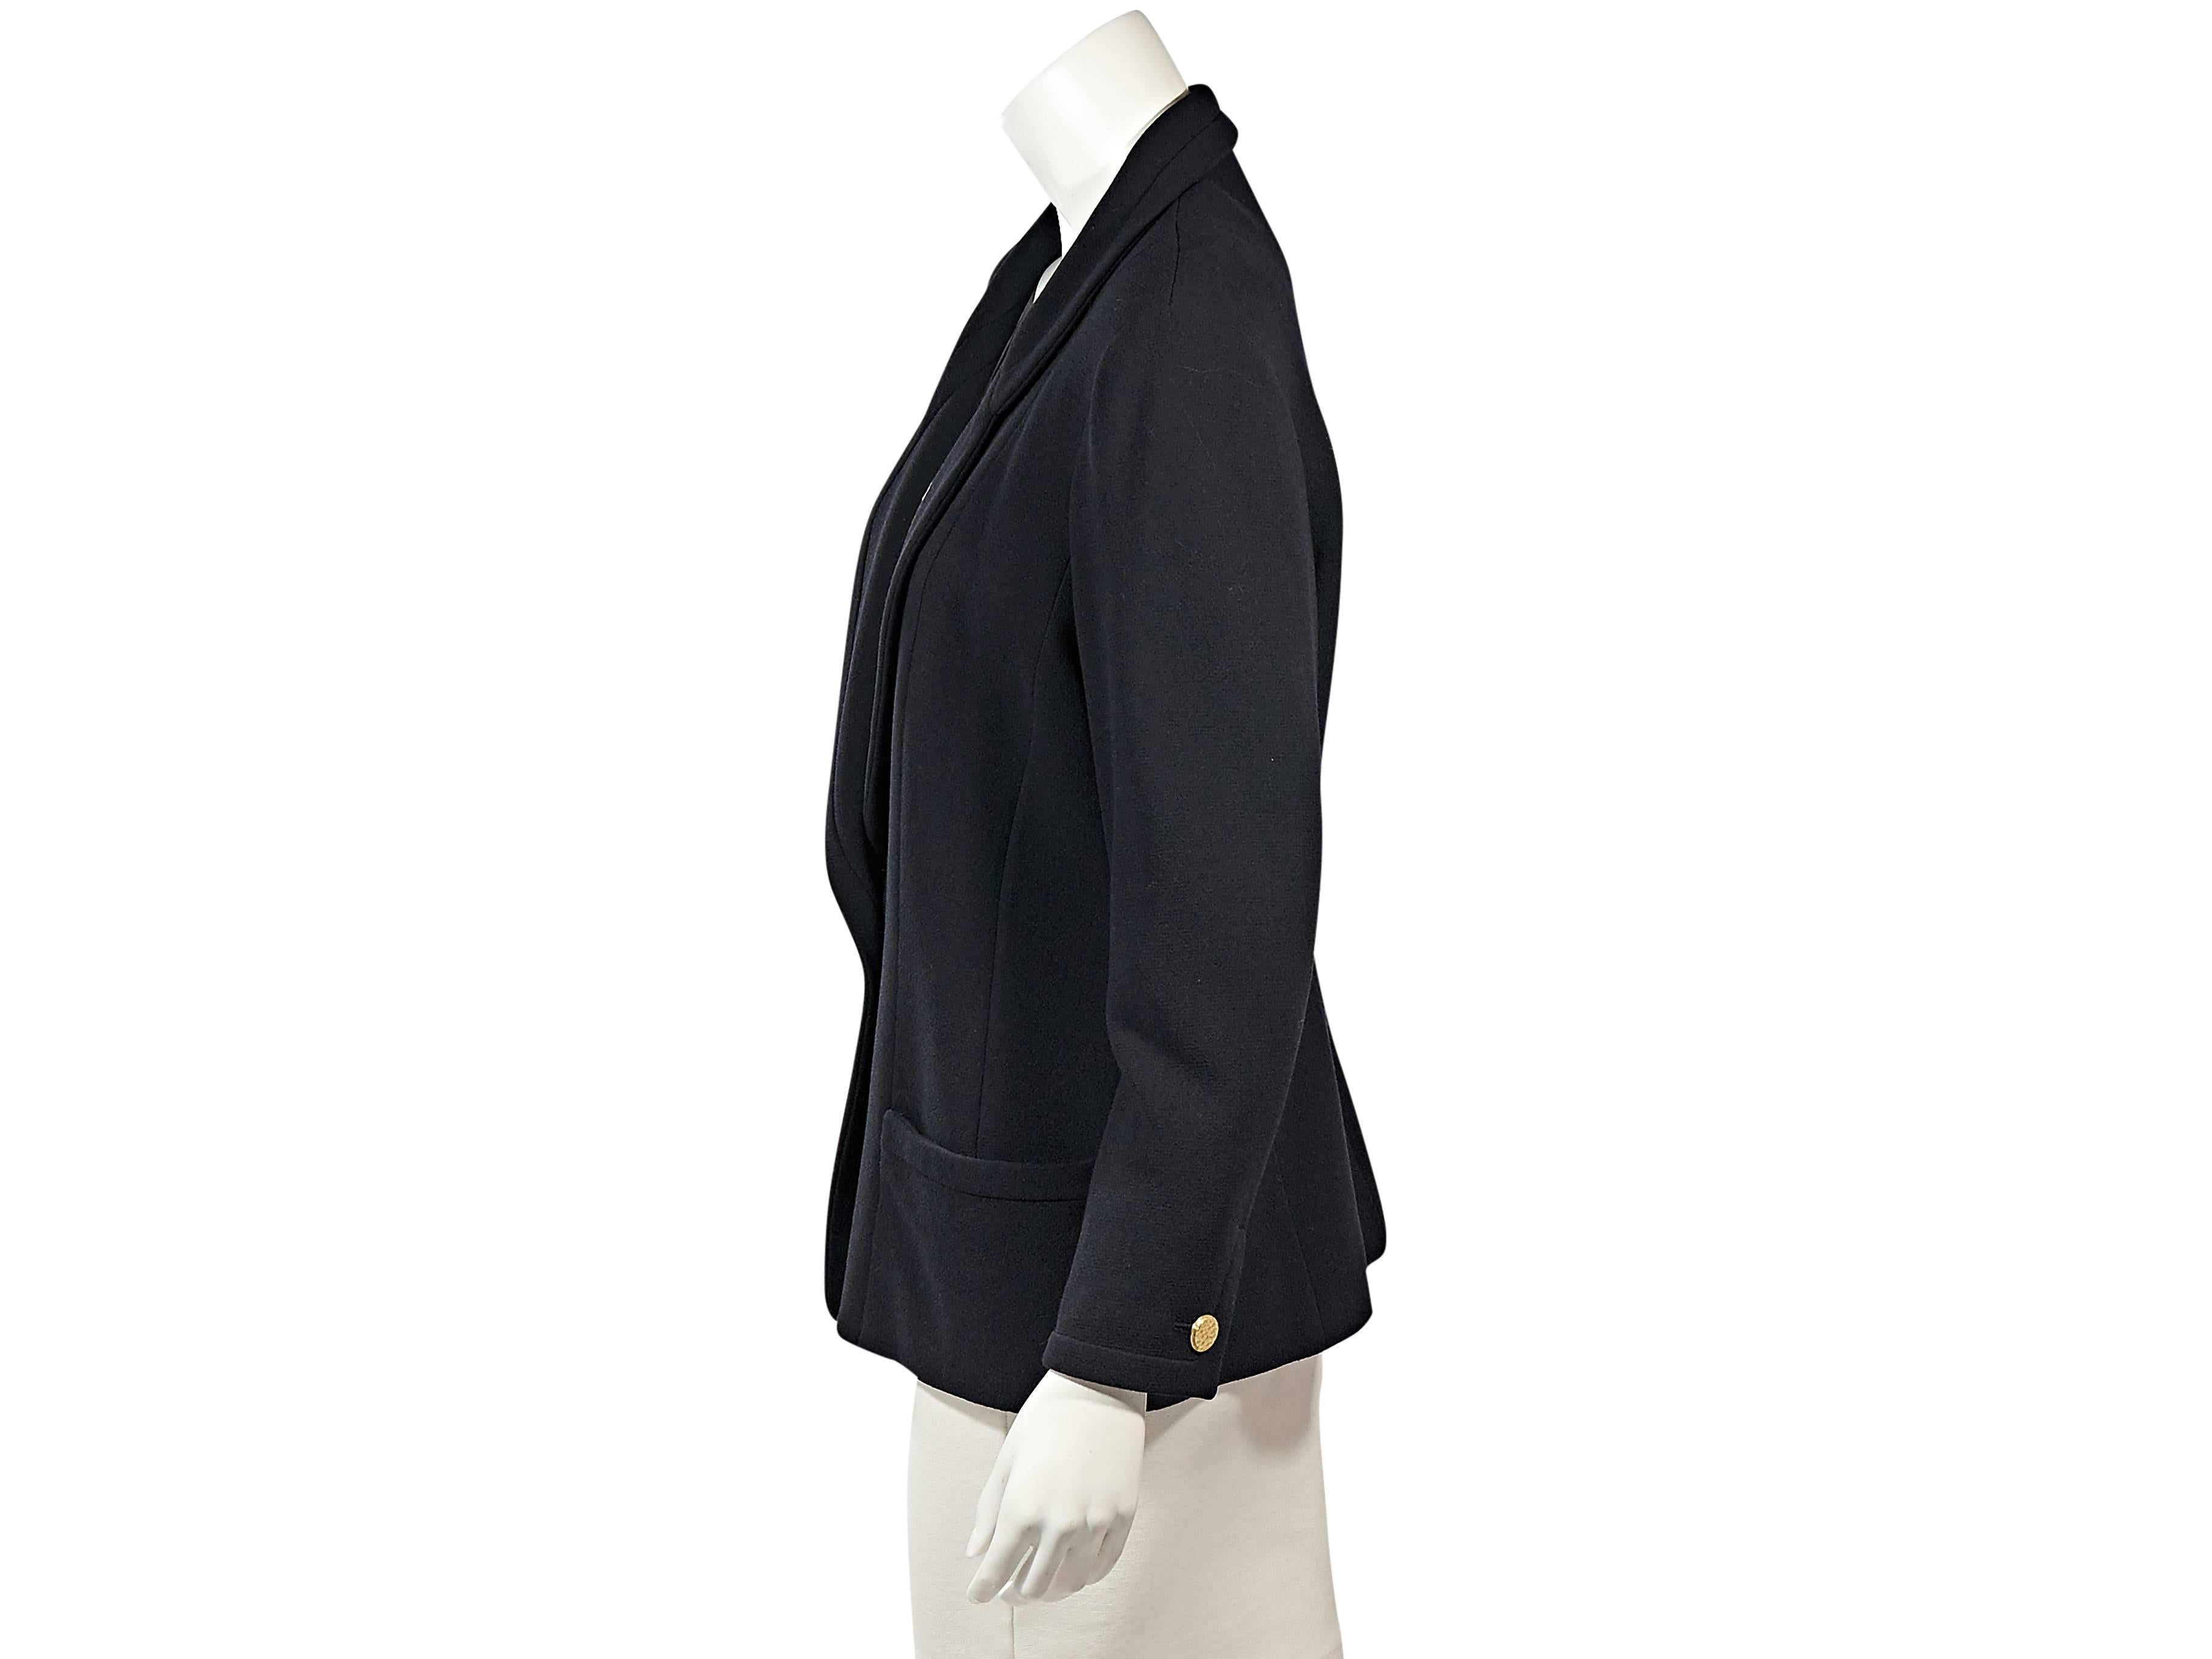 Product details: Vintage navy blazer by Chanel. Rounded notched lapel. Long sleeves. Button cuffs. Single-button closure. Front patch pockets.  42